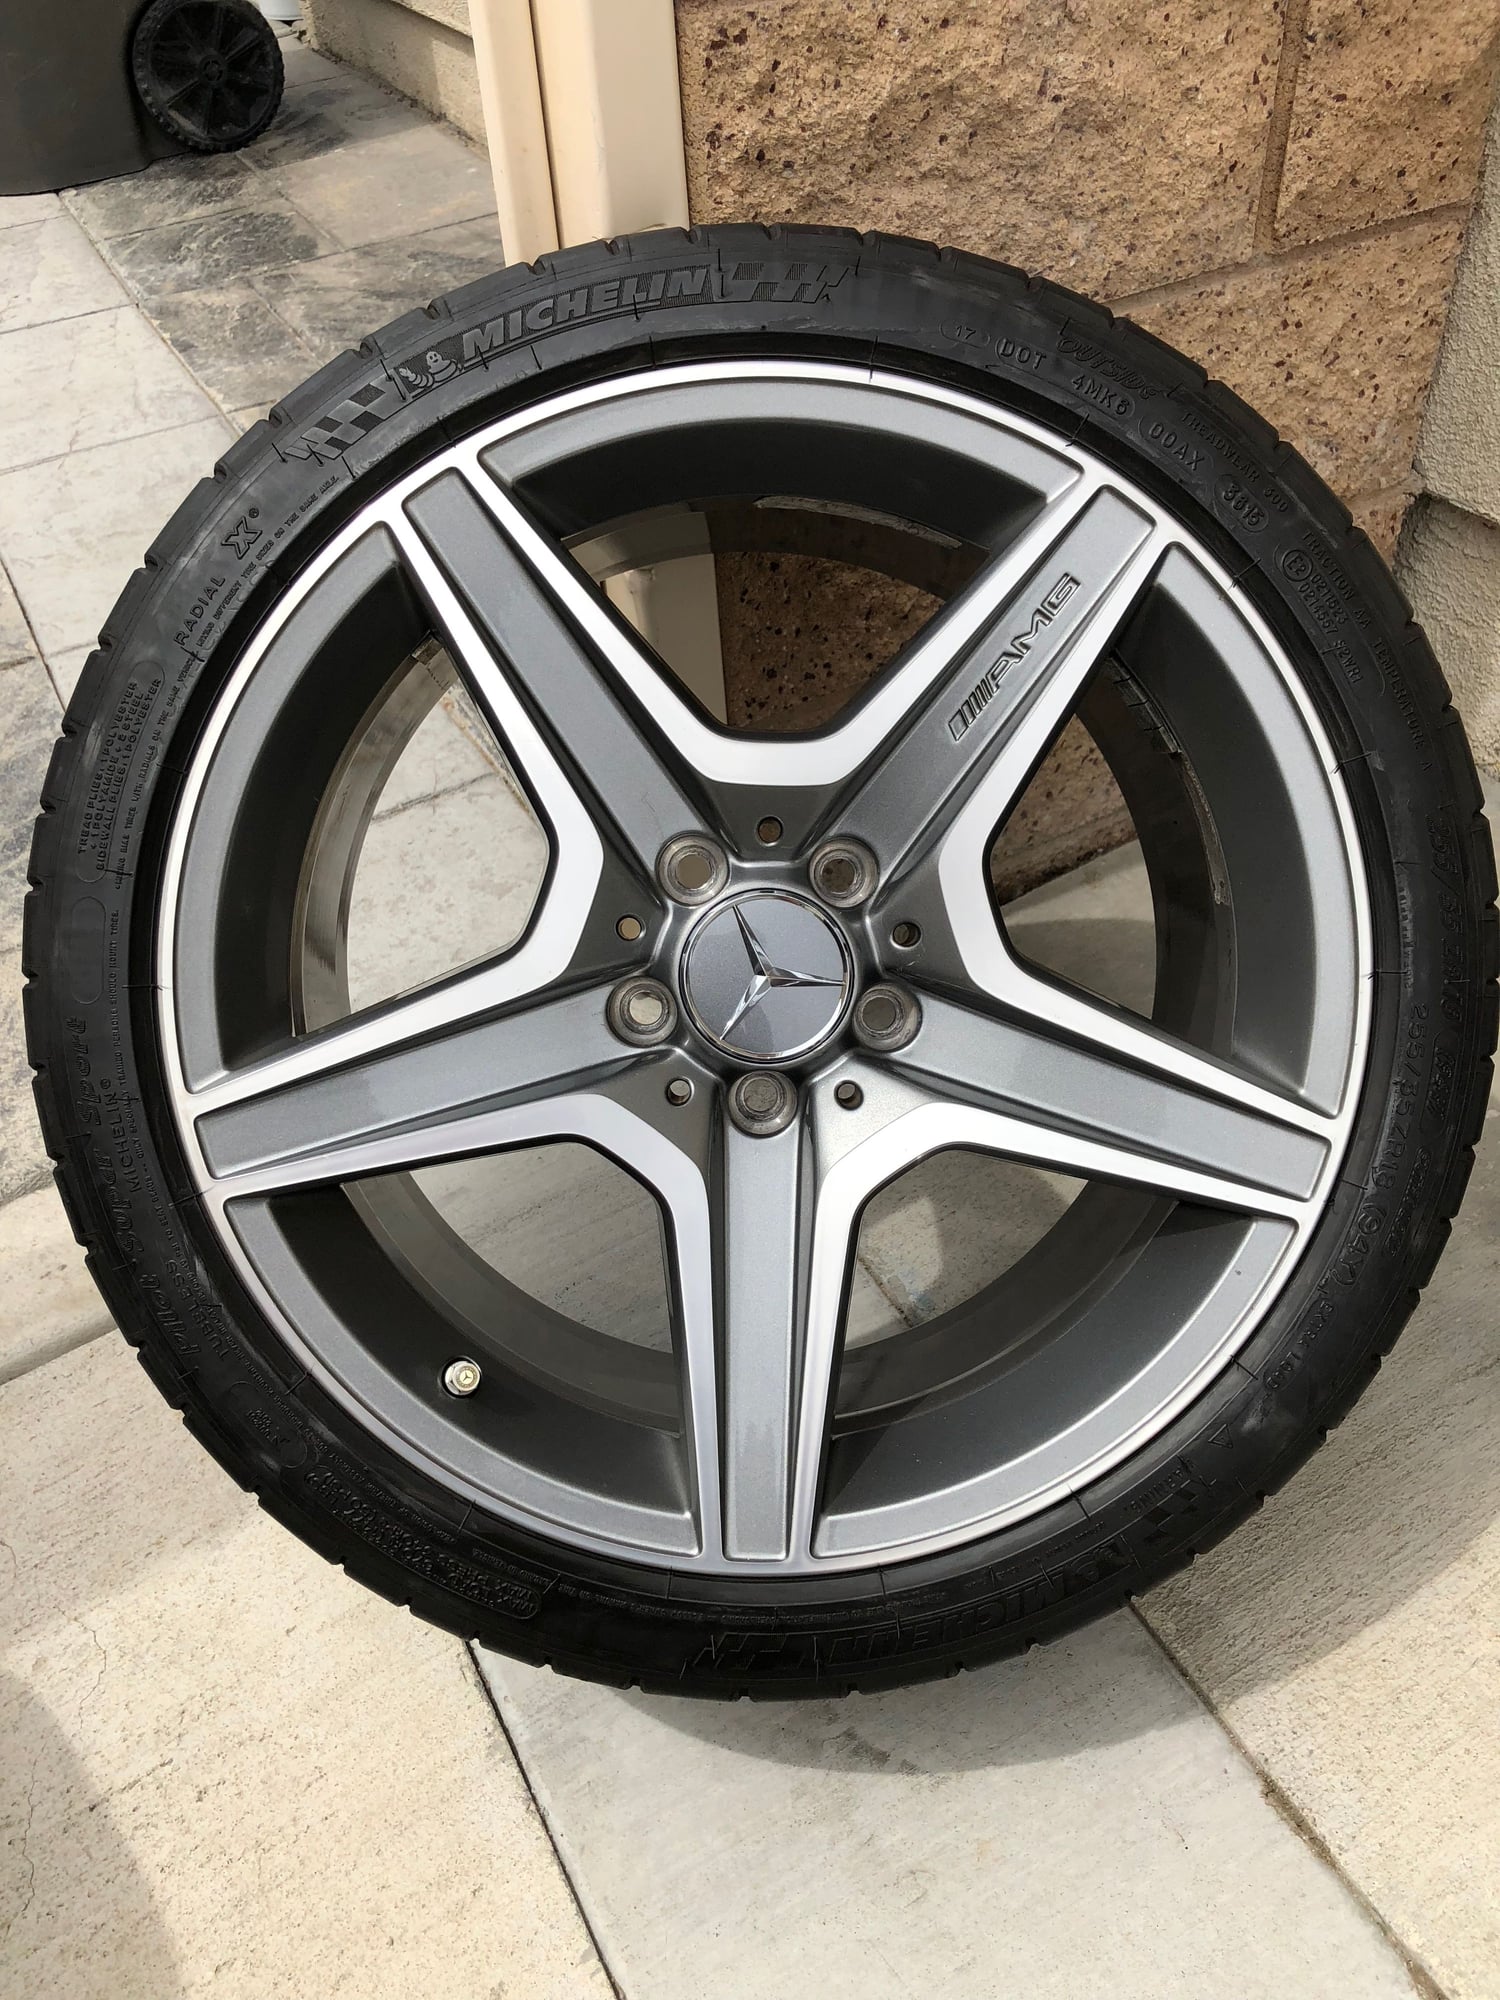 Wheels and Tires/Axles - OEM 18" C63 AMG 5 SPOKE WHEELS w/ TPMS and Michelin PSS - Used - 2009 to 2015 Mercedes-Benz C36 AMG - Riverside, CA 92507, United States